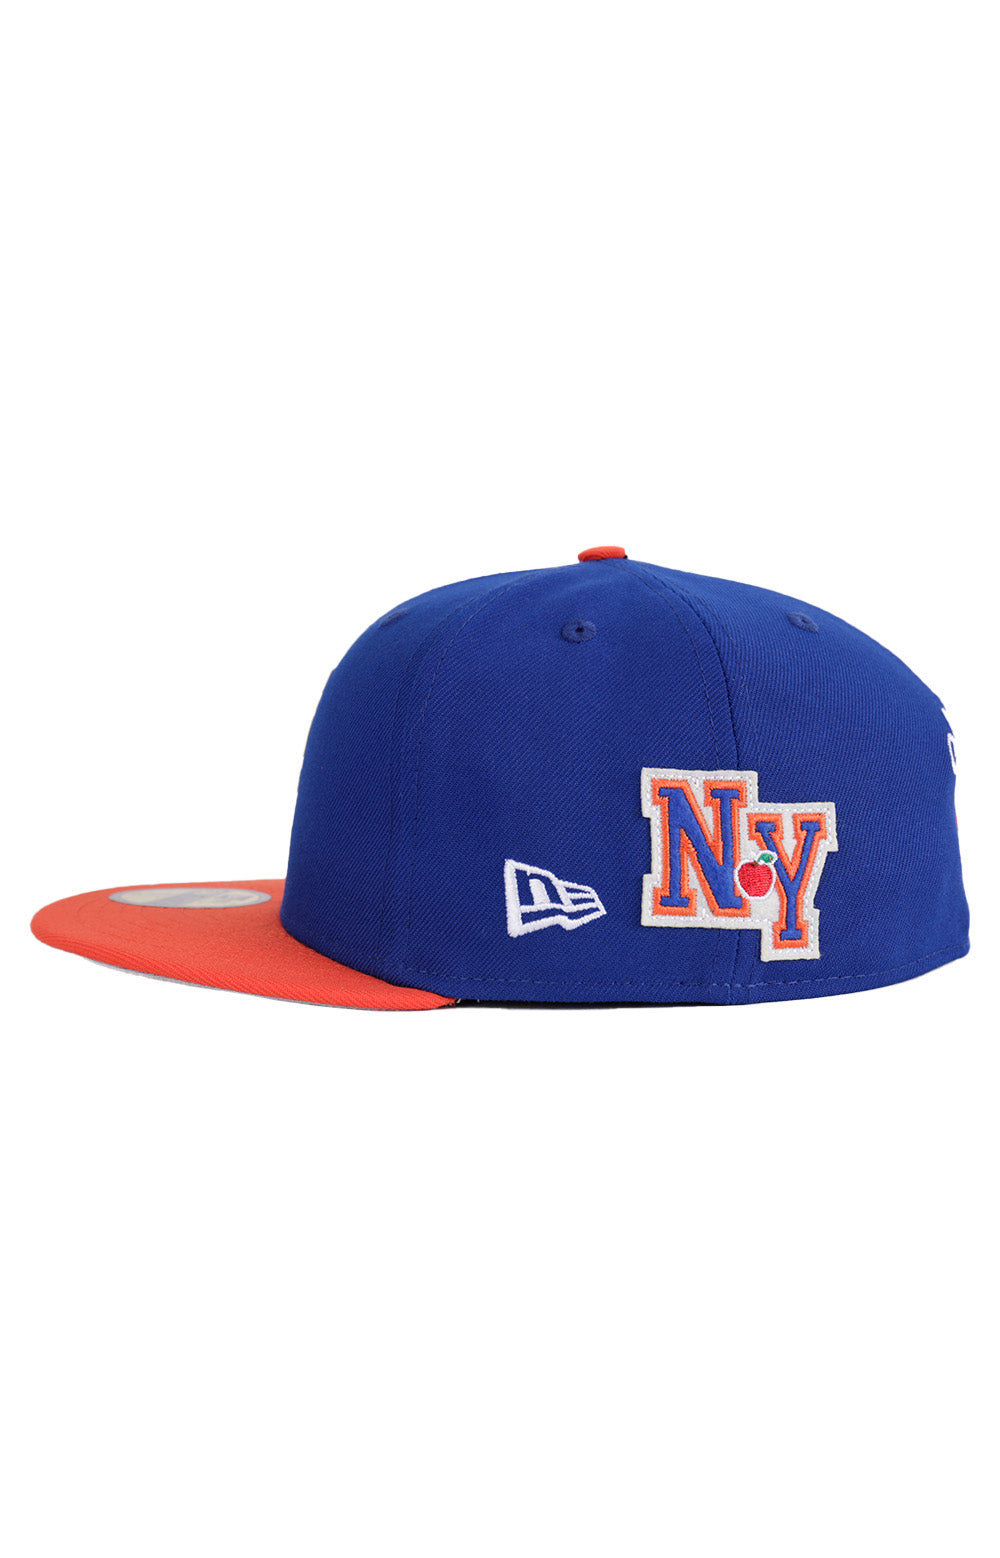 NY Mets Letterman 59FIFTY Fitted Hat